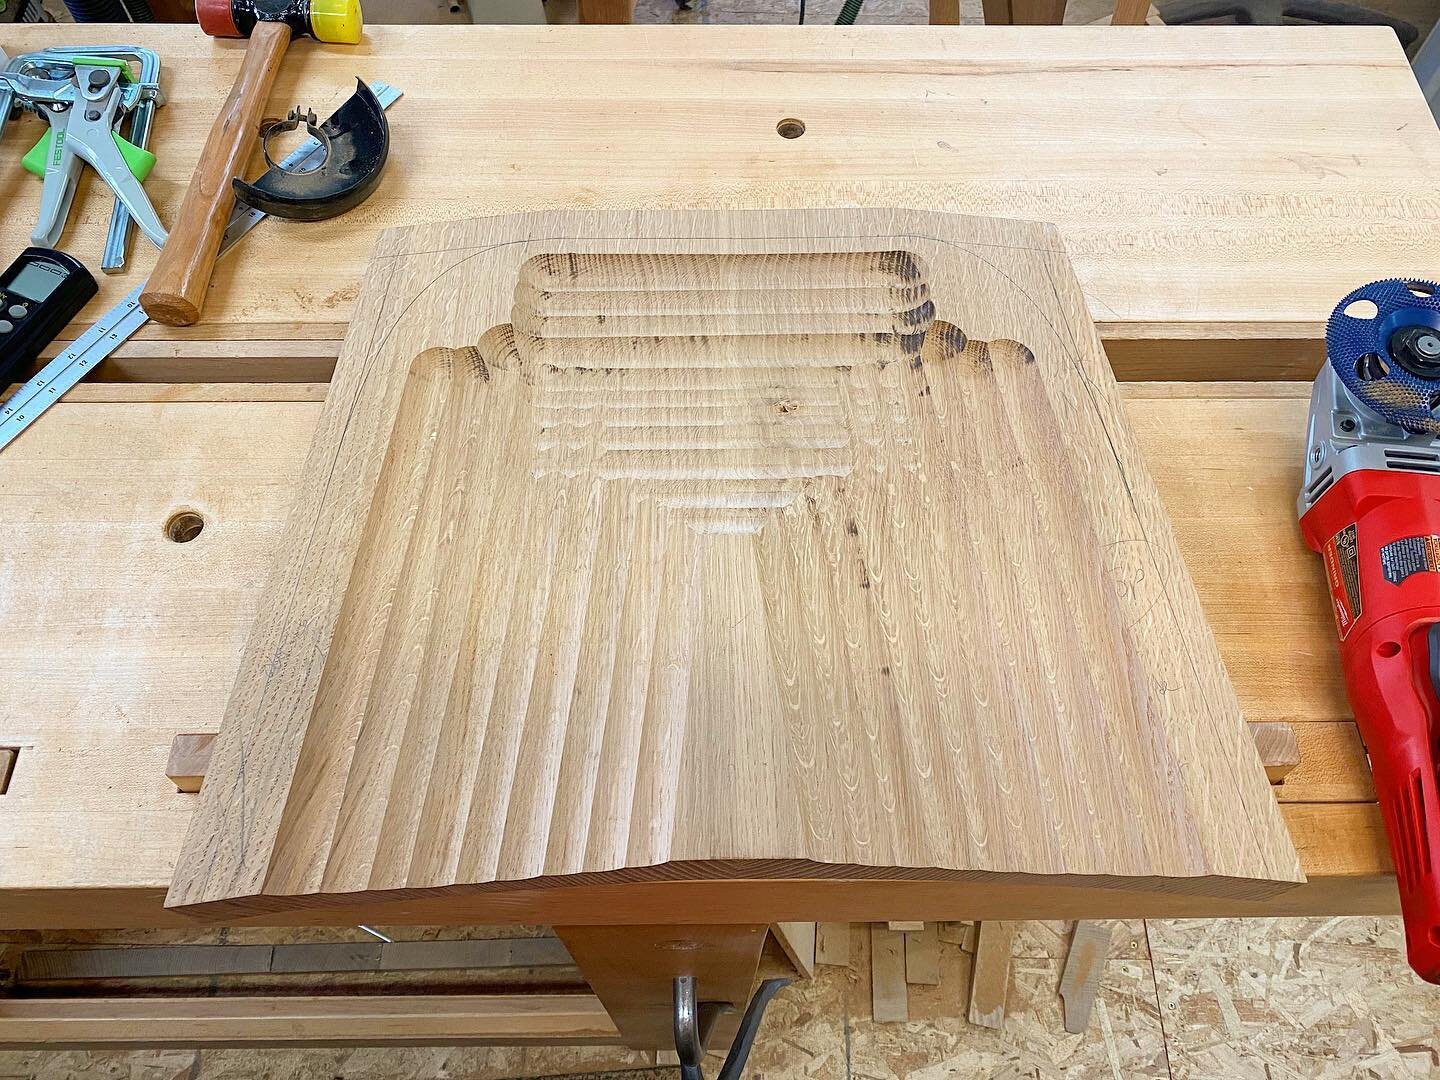 The new router process to hog out most of the waste on the carved seats is a winner. On previous chairs I was averaging 3-4 hours from seat blank to finished seat ready for final sanding. The new process has cut this down to about 1.5-2 hours. 

When